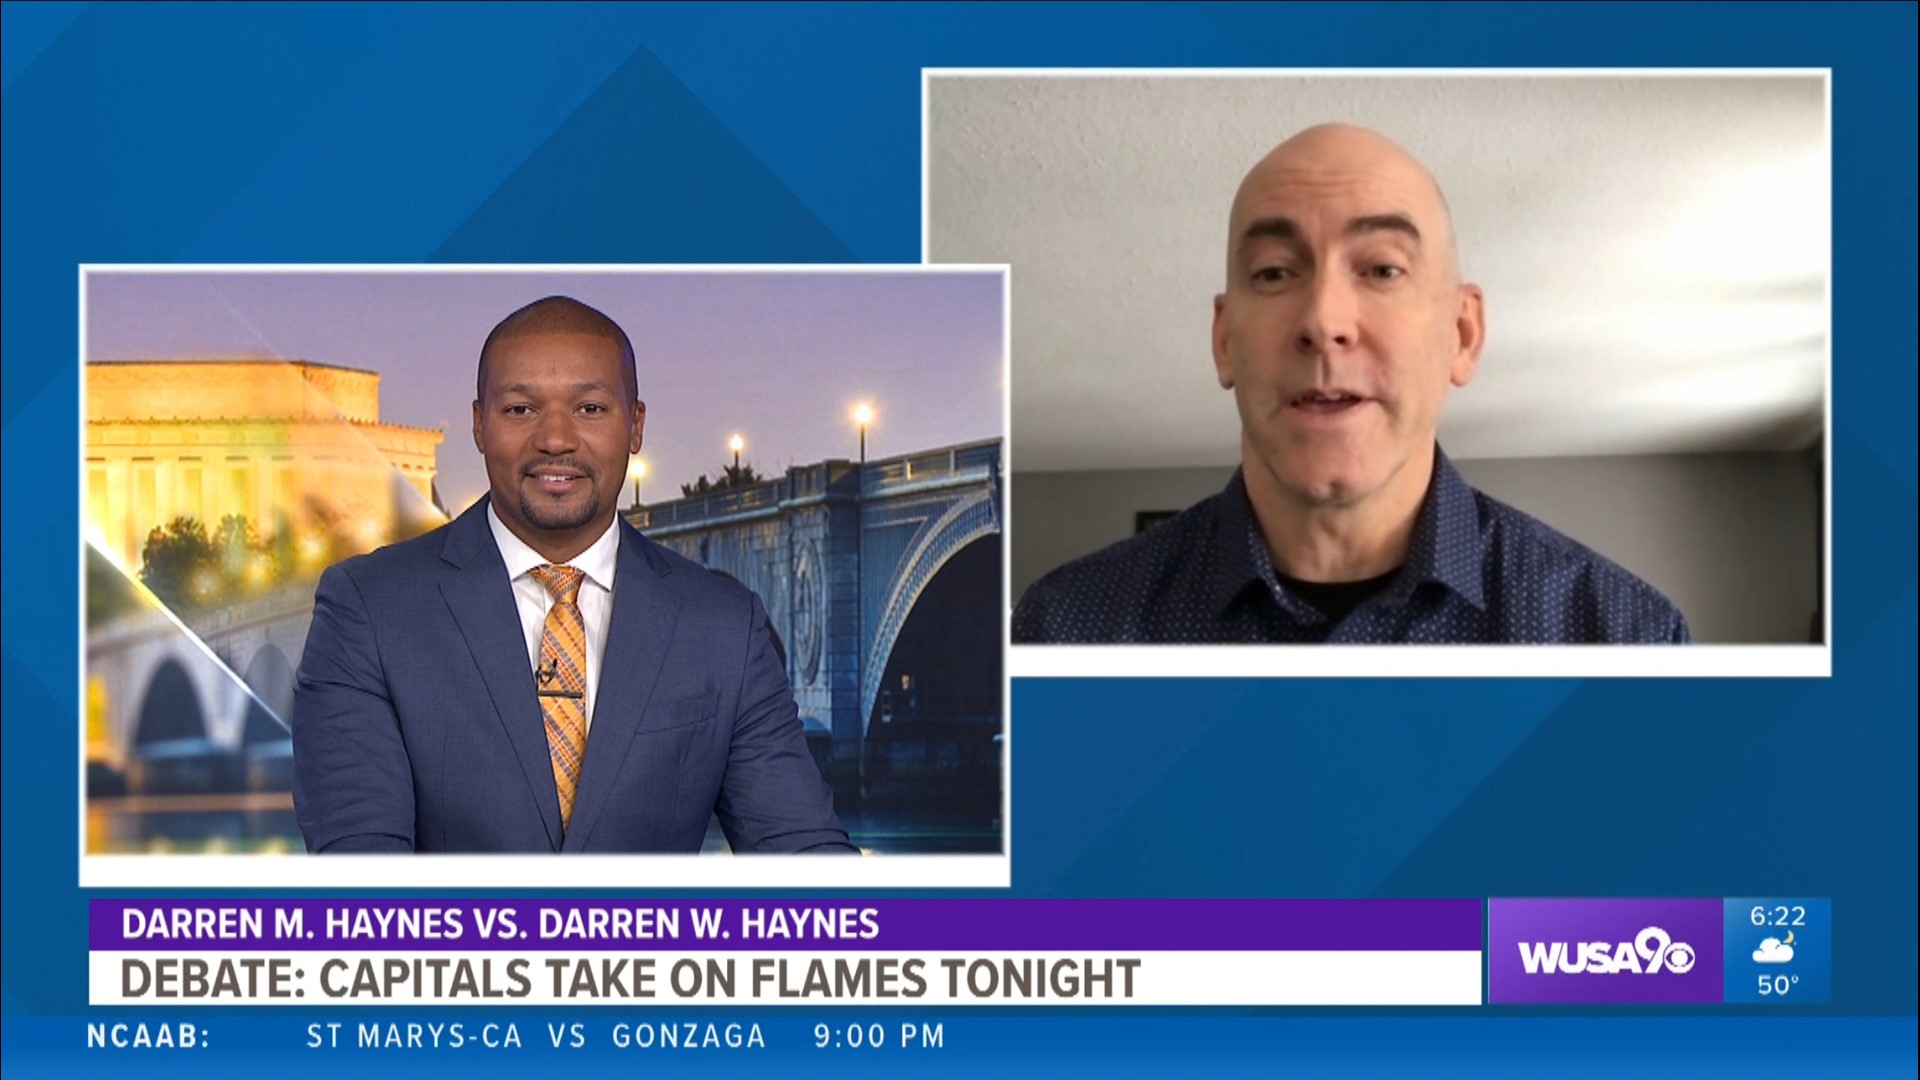 Washington Capitals is taking on the Calgary Flames in hockey. Darren M. Haynes talks to Darren W. Haynes about who will win in the match up.